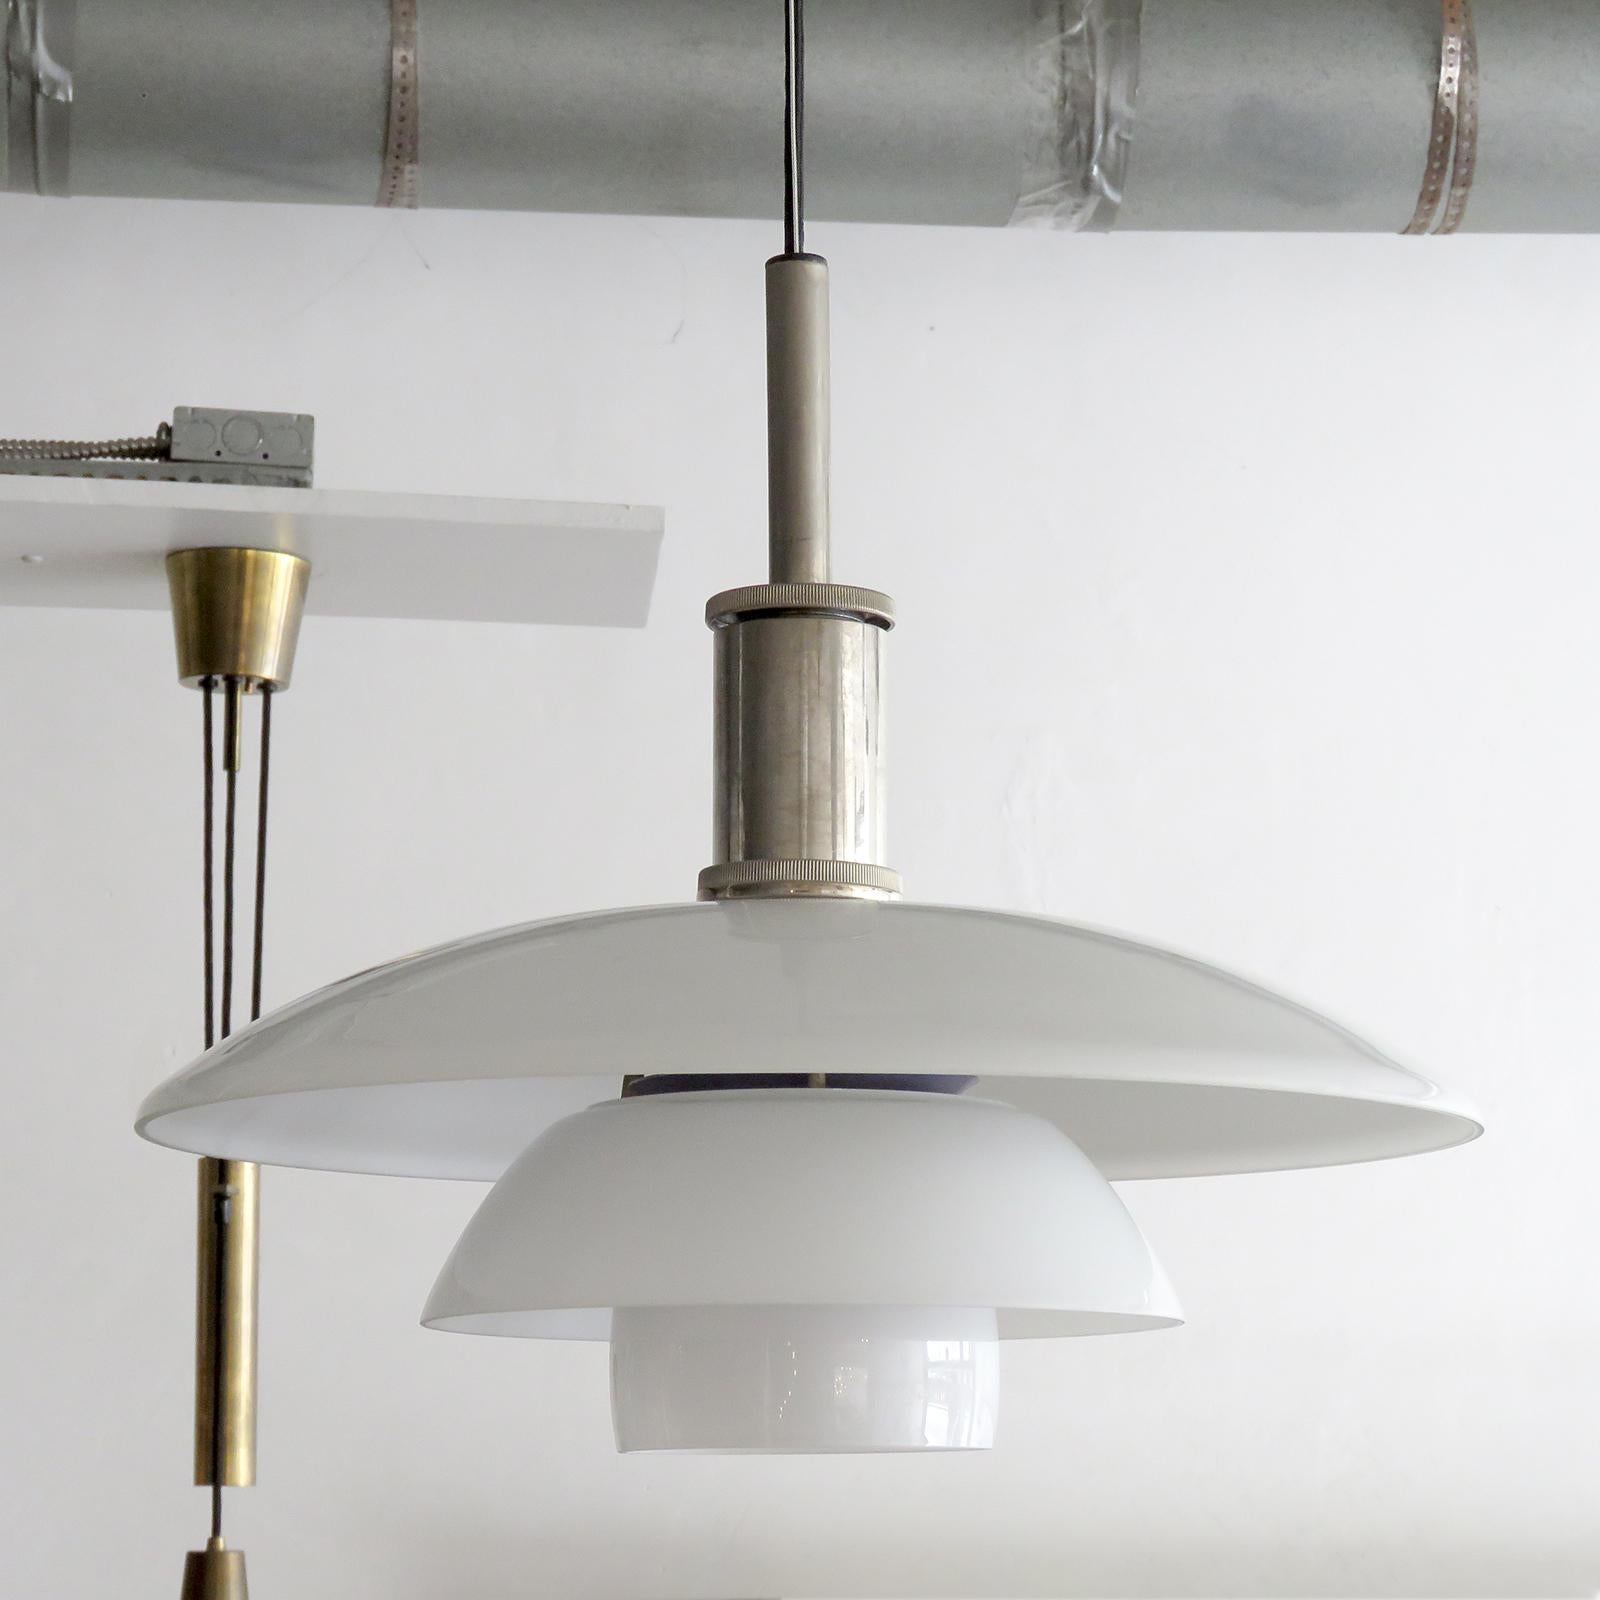 Wonderful PH 4½/4 pendant light by Poul Henningsen for Louis Poulsen with opaline glass shade set, diffuser in matte frosted glass and chrome hardware, marked, wired for US standards, one E27 socket, max. wattage 75w, bulb provided as a onetime